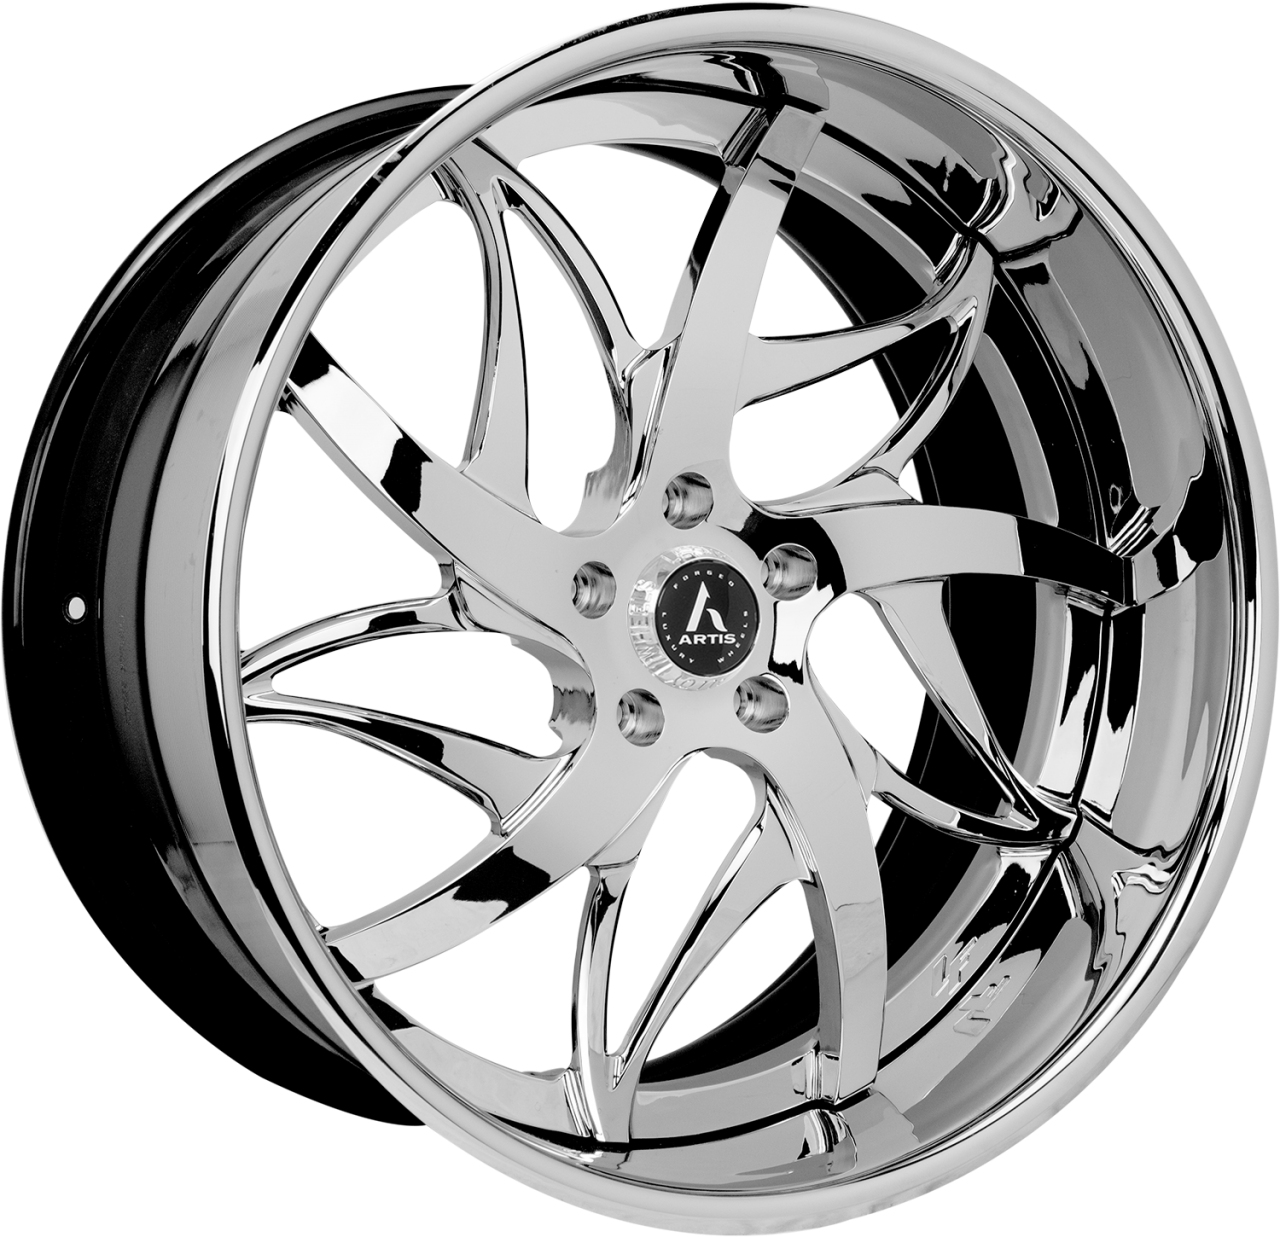 Artis Forged Immortal wheel with Chrome finish